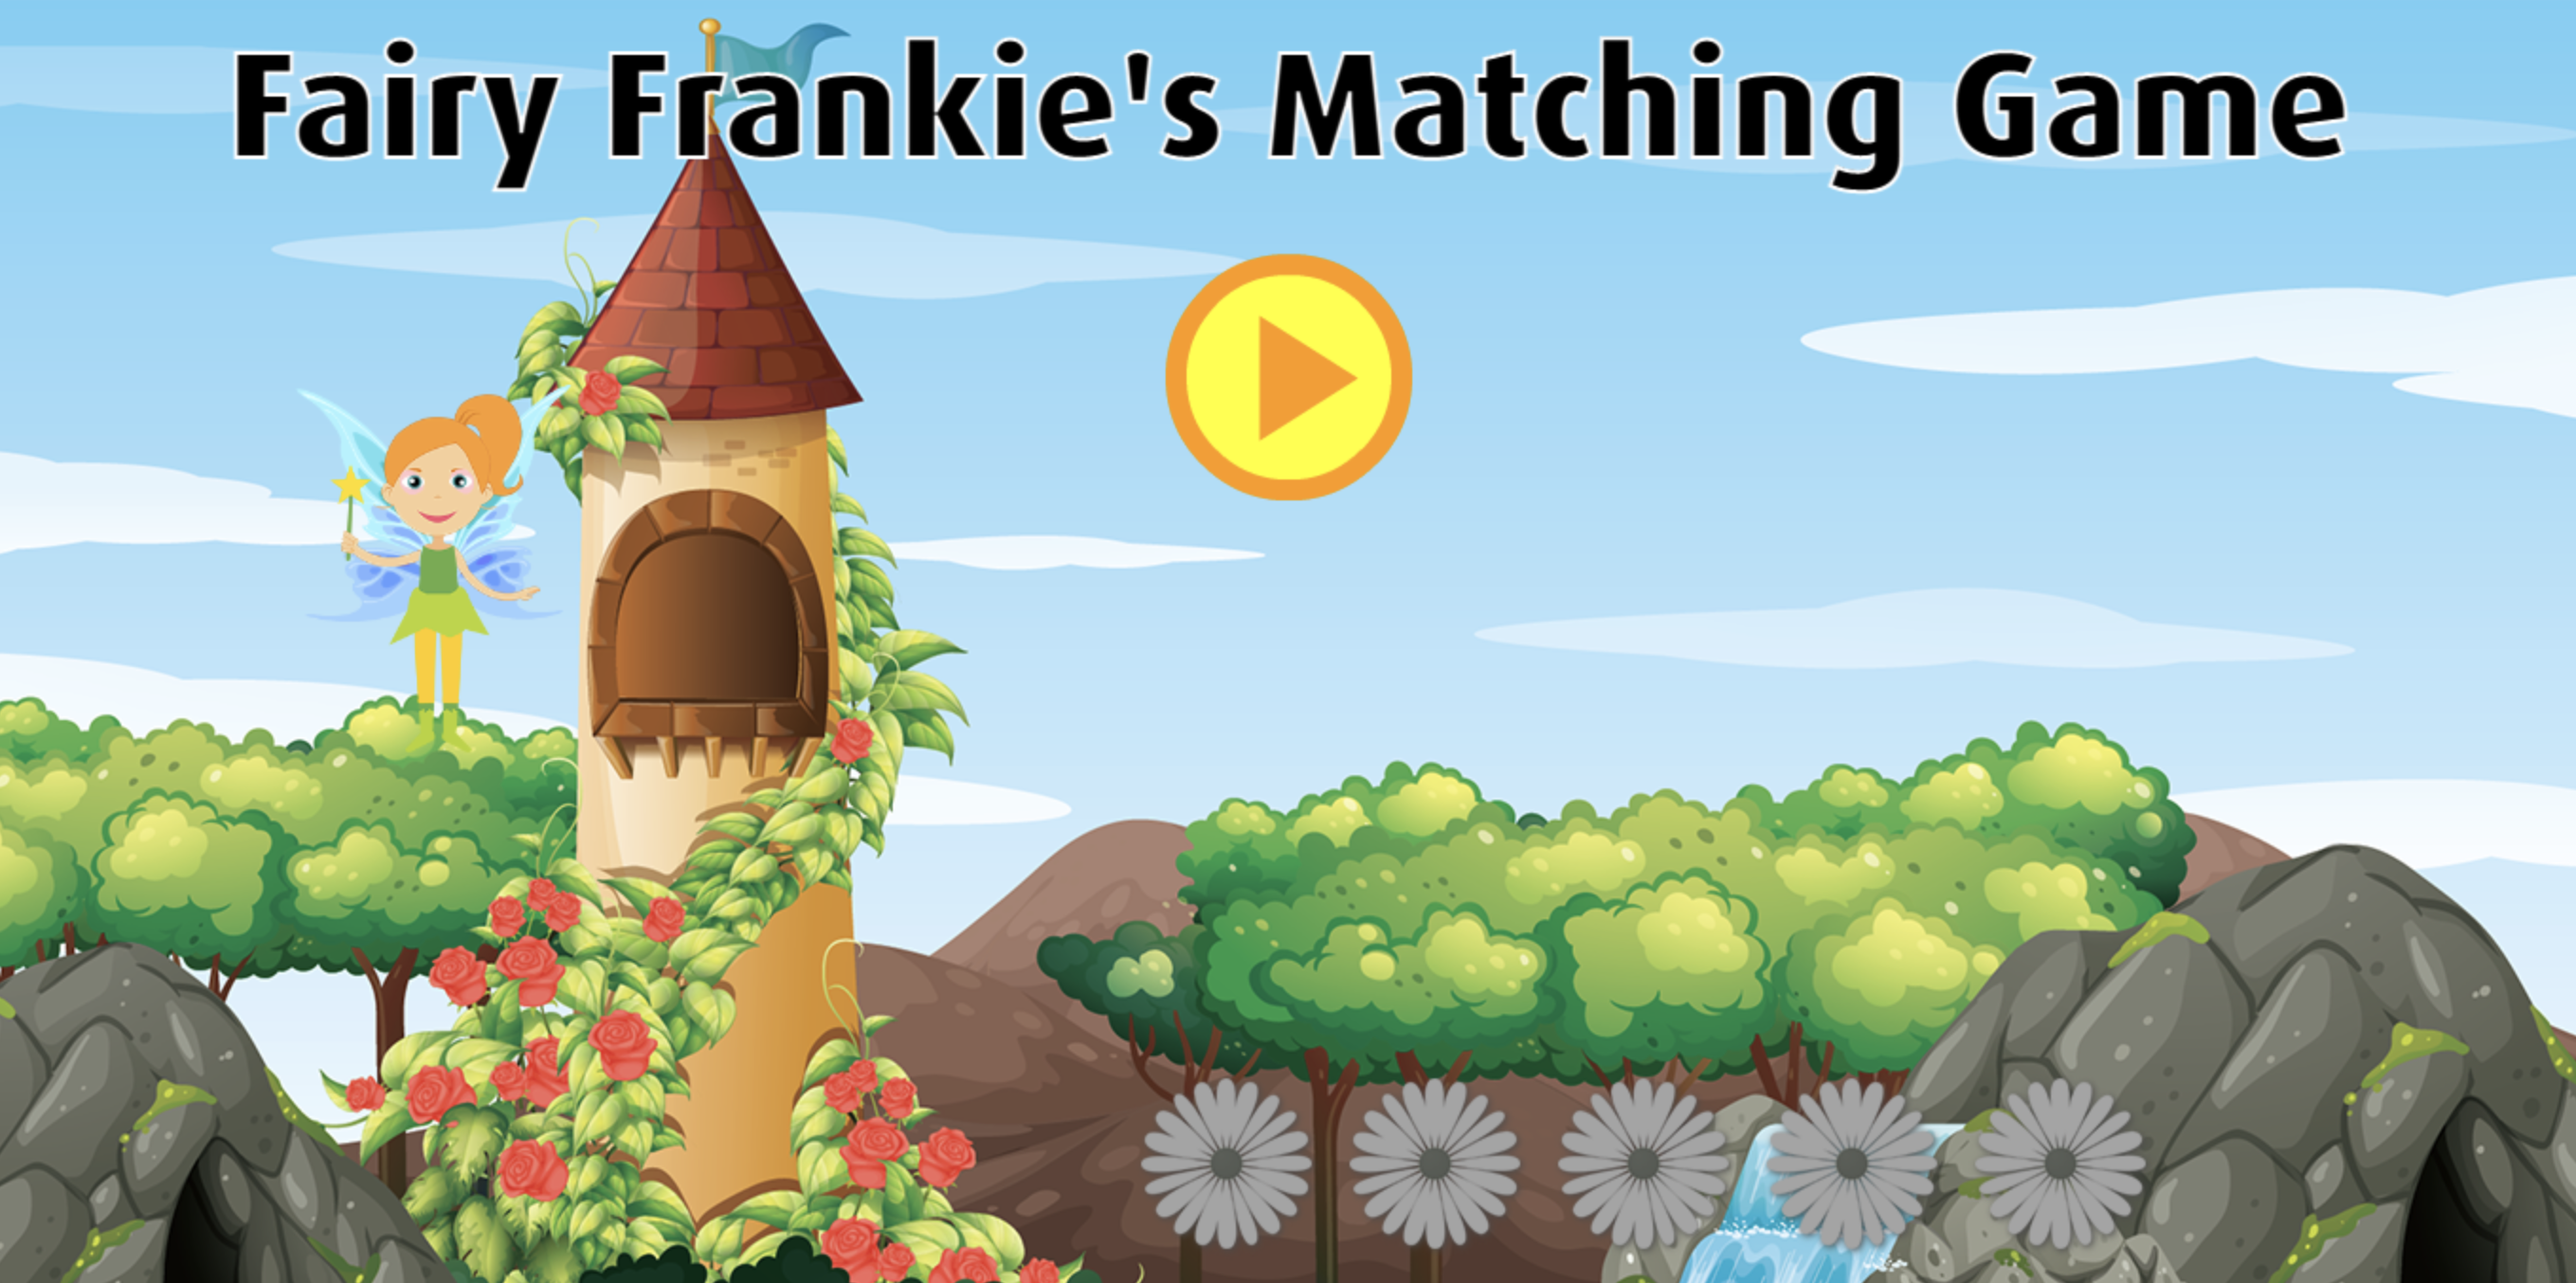 Fairy Frankie's Matching Game